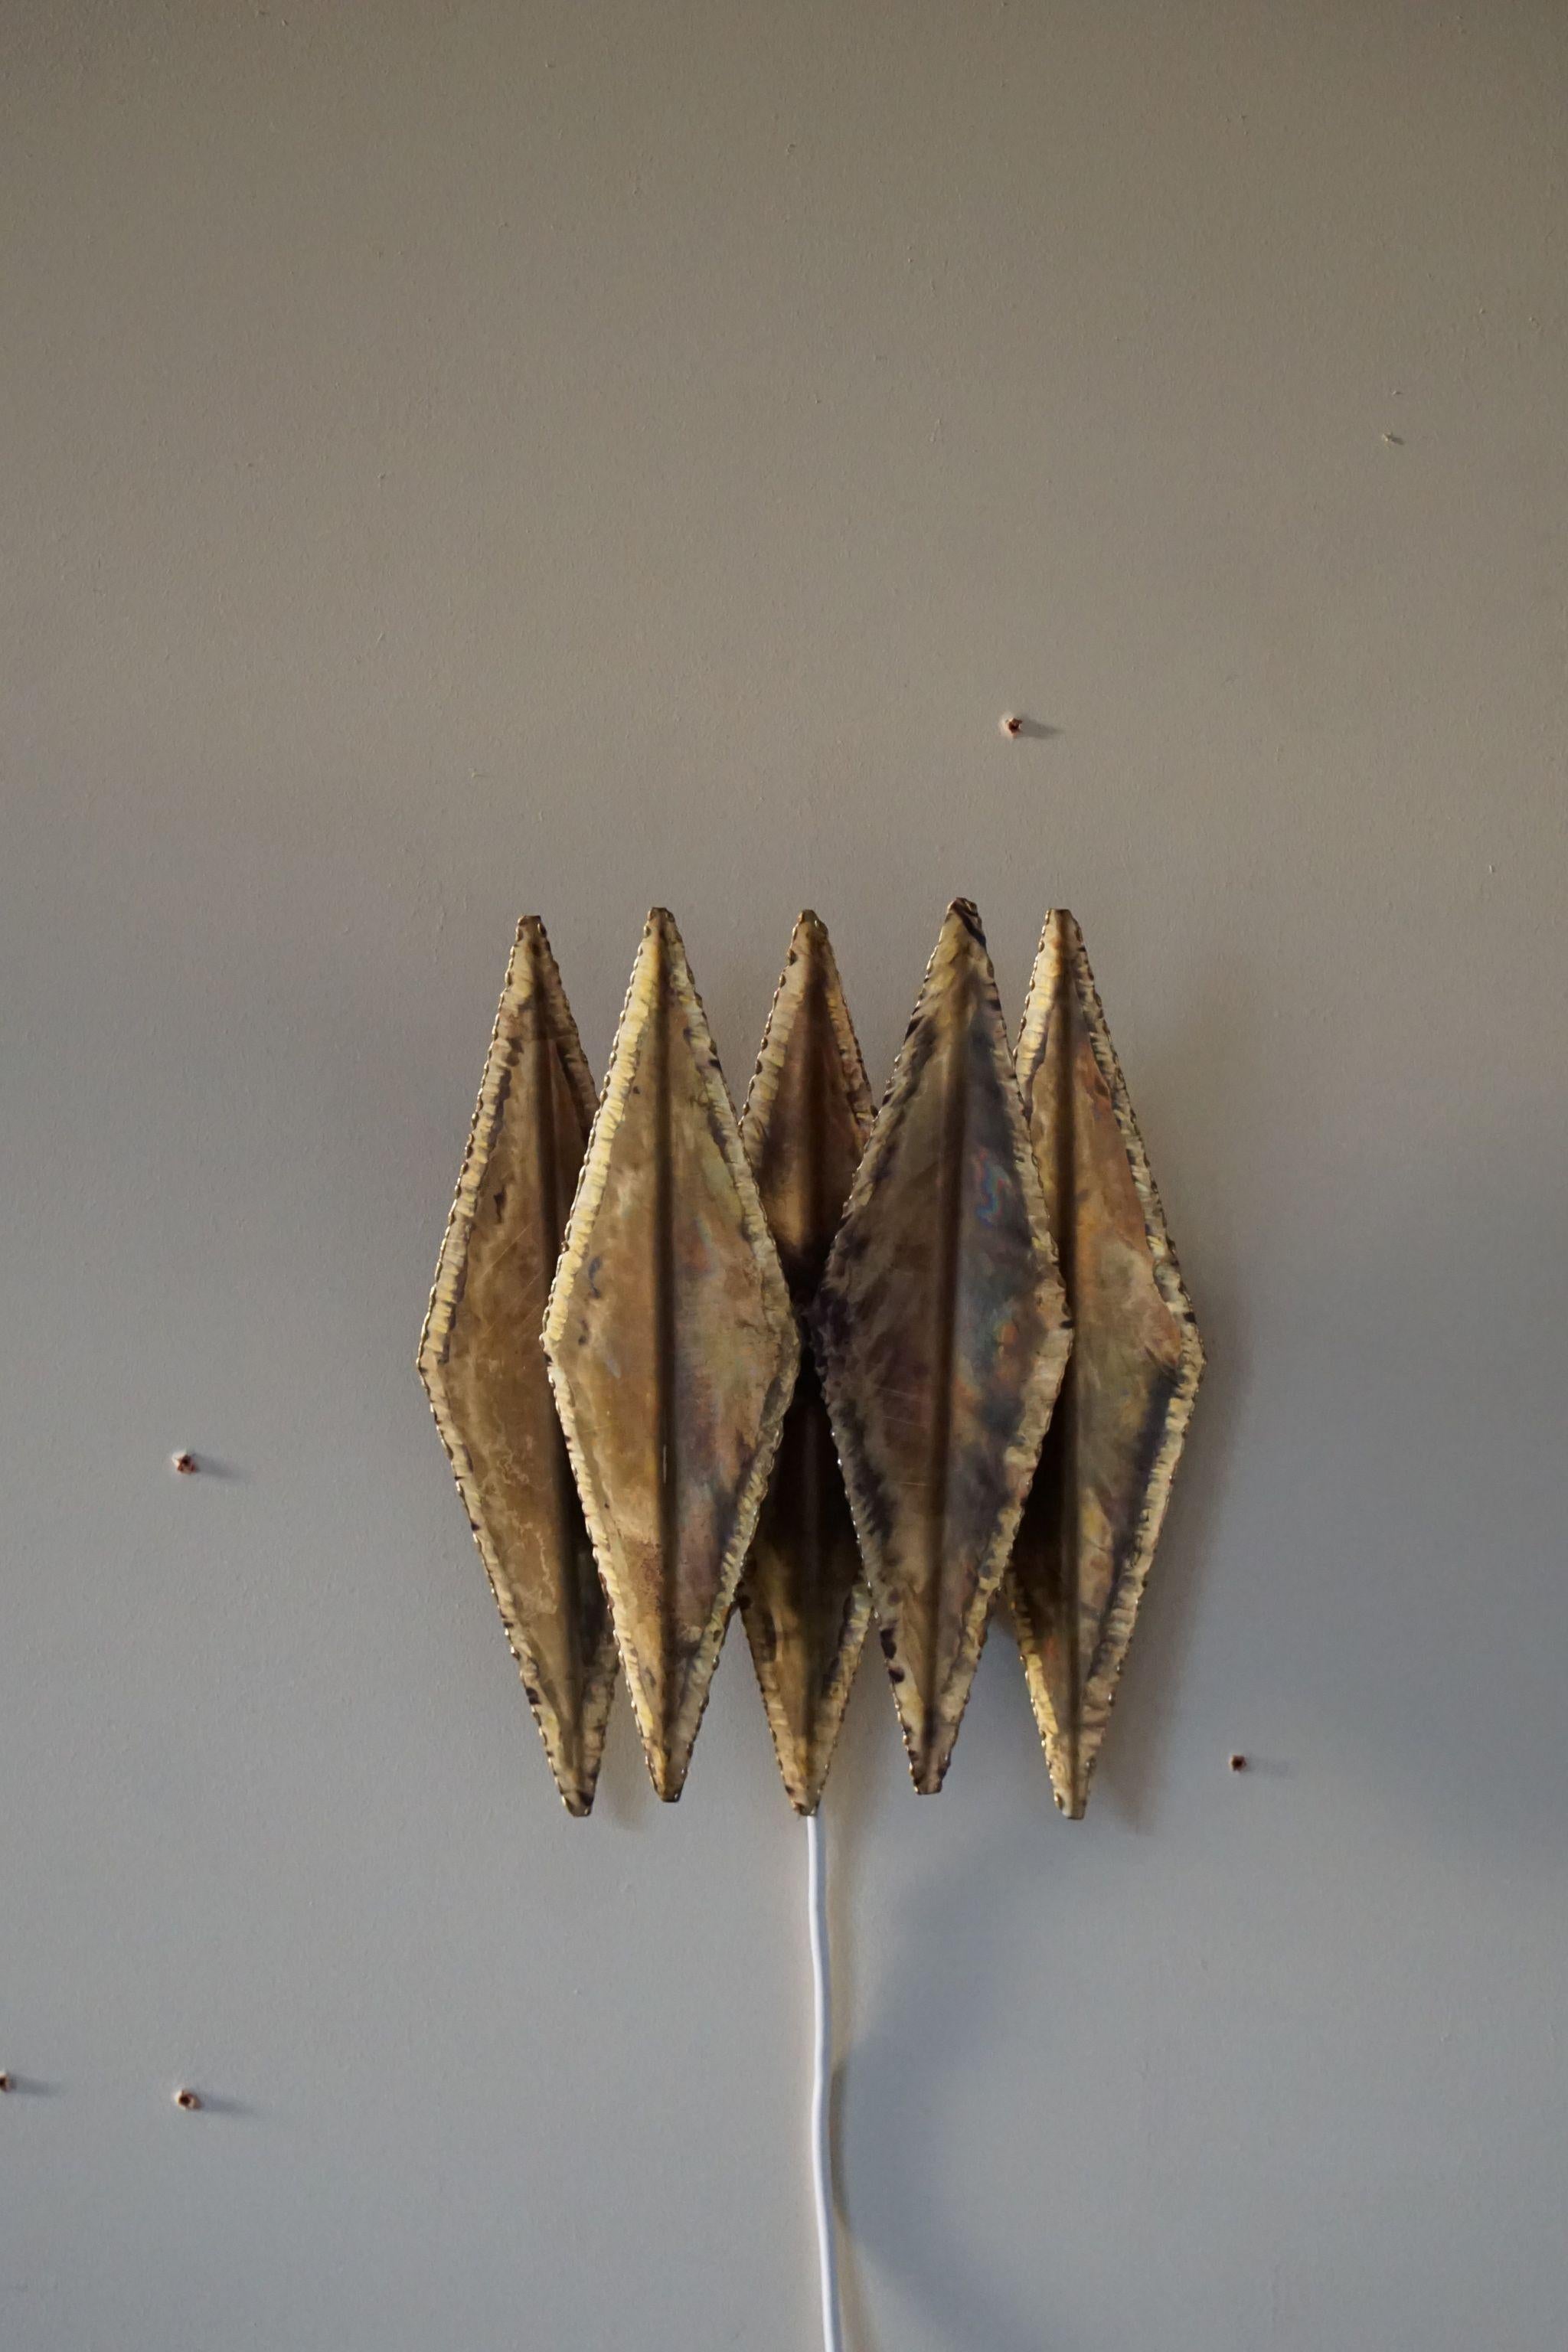 20th Century Svend Aage Holm Sørensen Brutalist Wall Light in Brass, 1960s For Sale